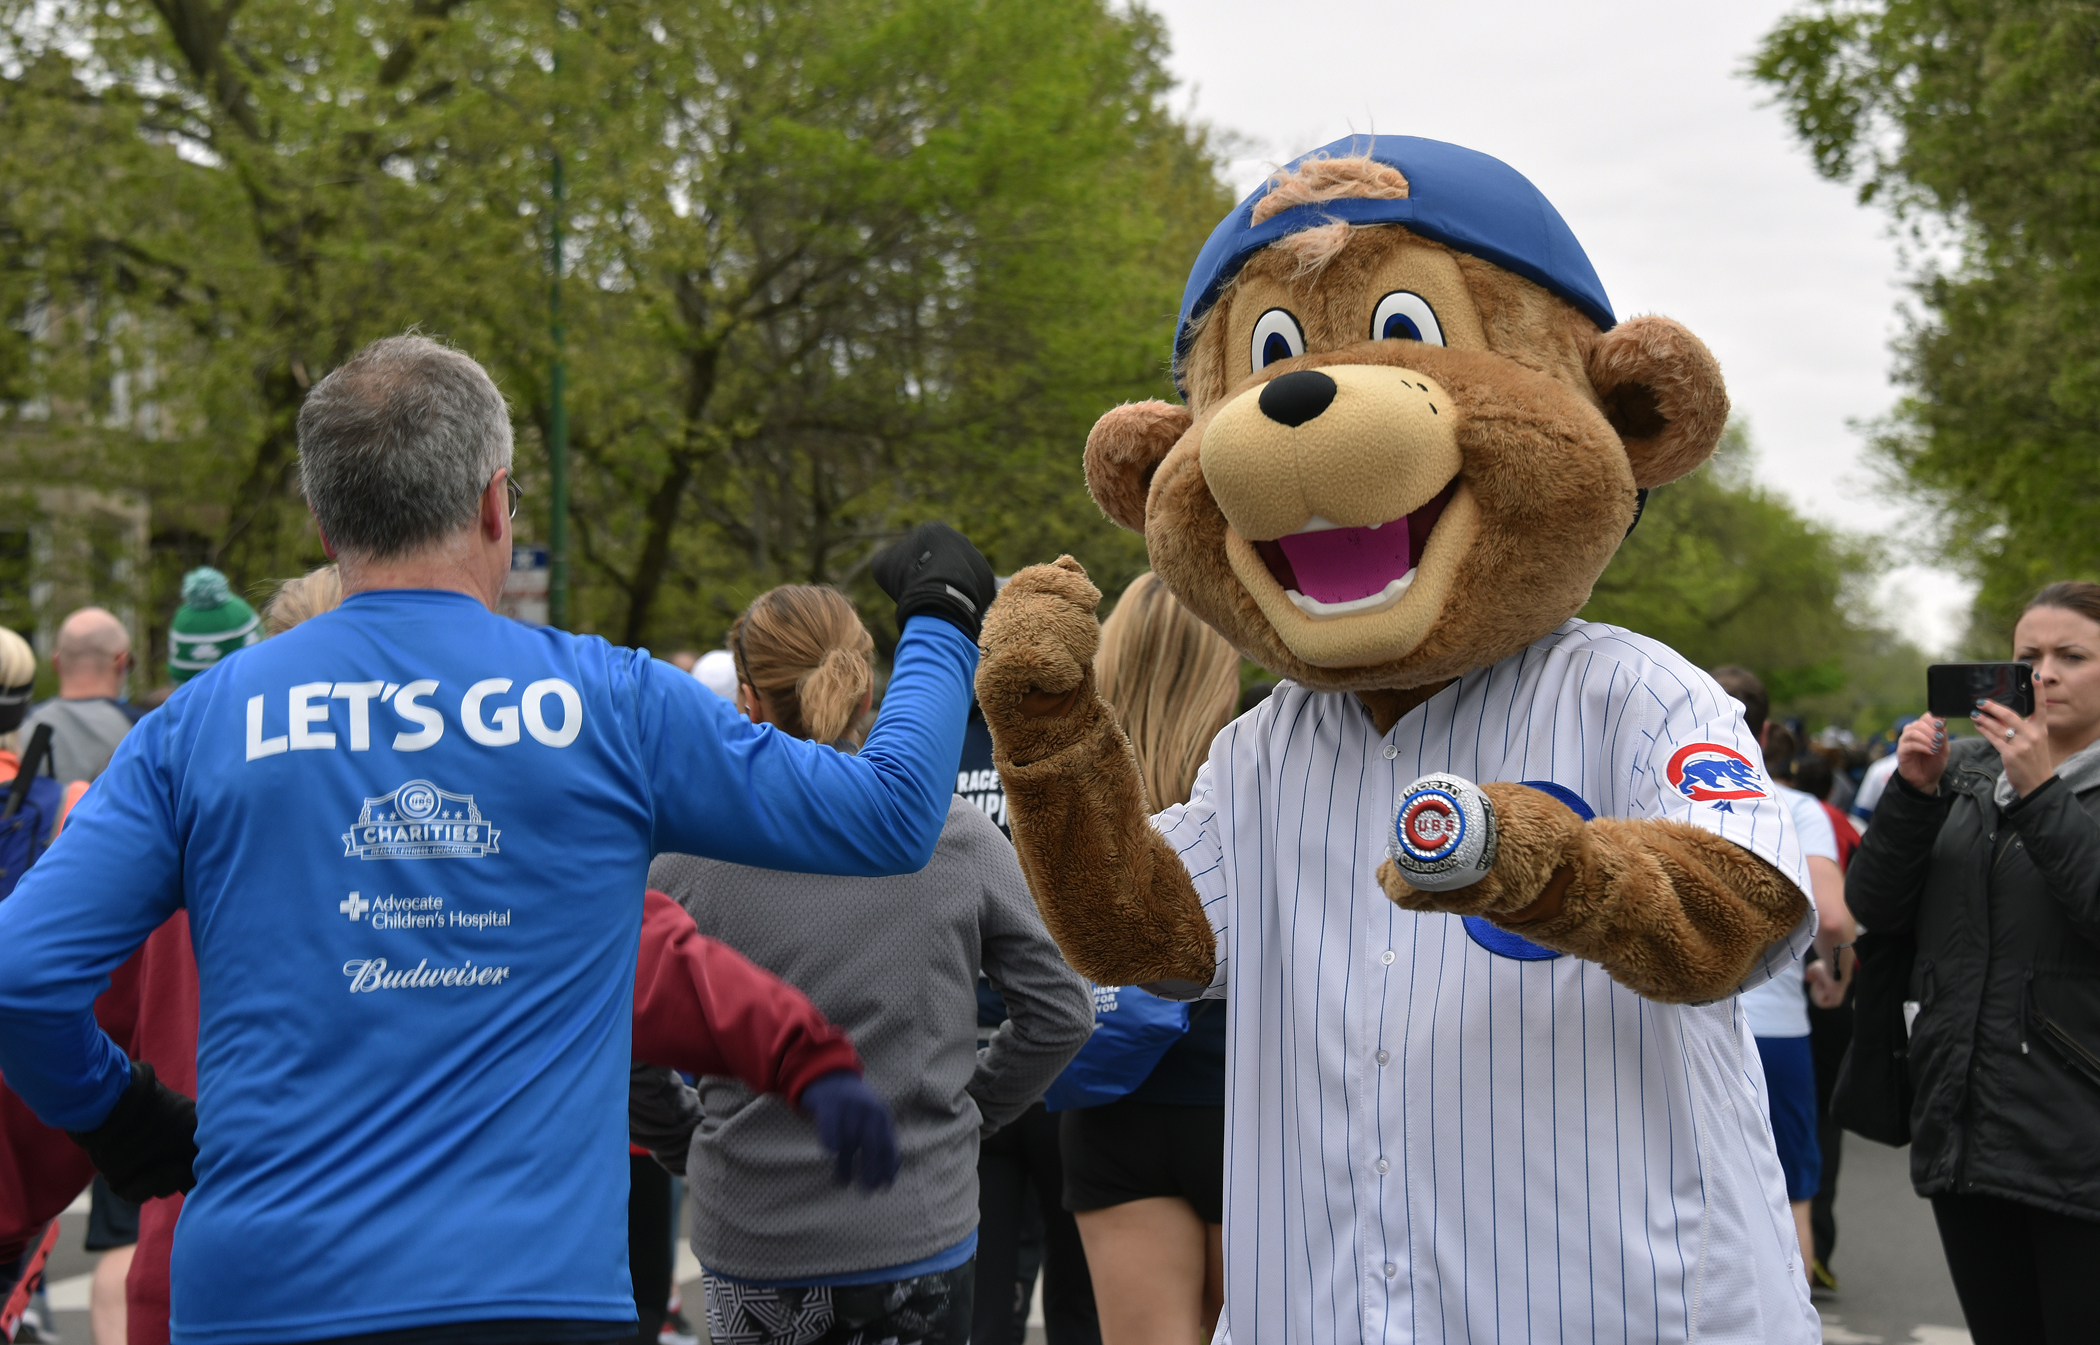 Runners show their medal in annual Race to Wrigley for Cubs Charities